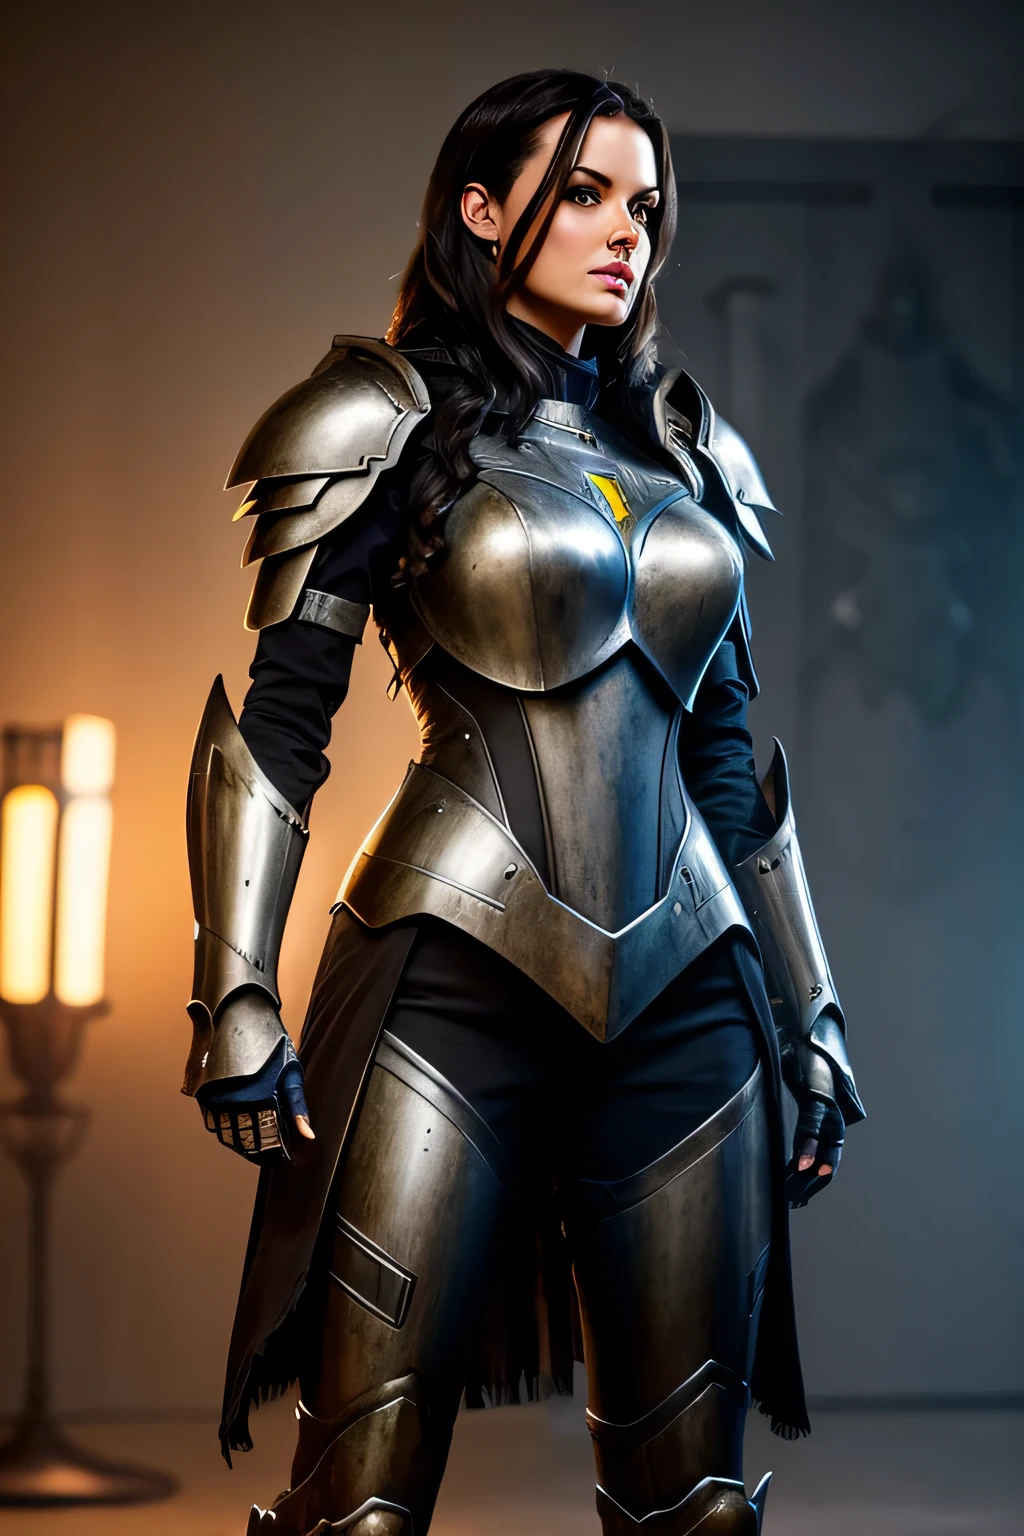 Tall beautiful woman with dark hair wearing highly realistic and detailed robotic armor